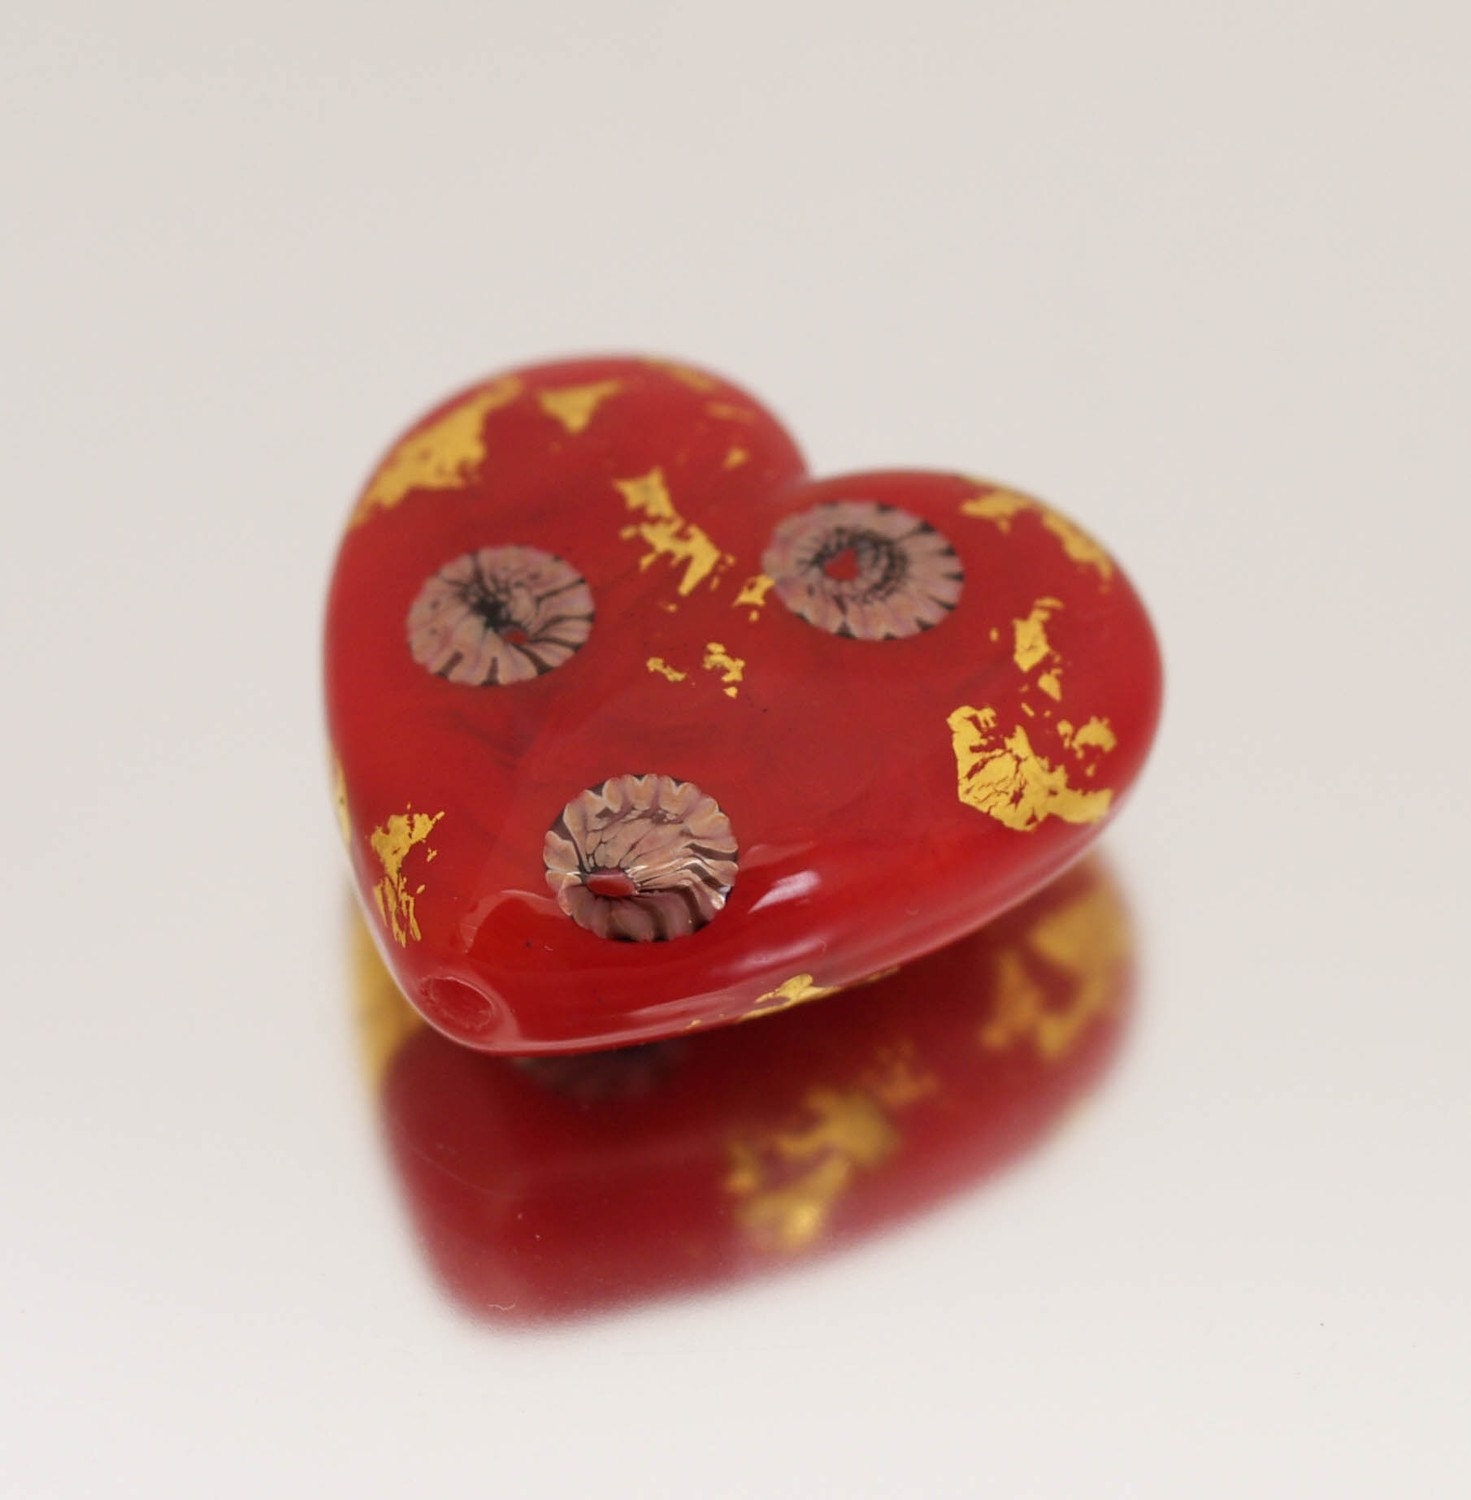 This lovely focal heart bead coordinates with the Geisha set. A stunning shade of scarlet red, decorated with white, red and black murrini and gold foil.